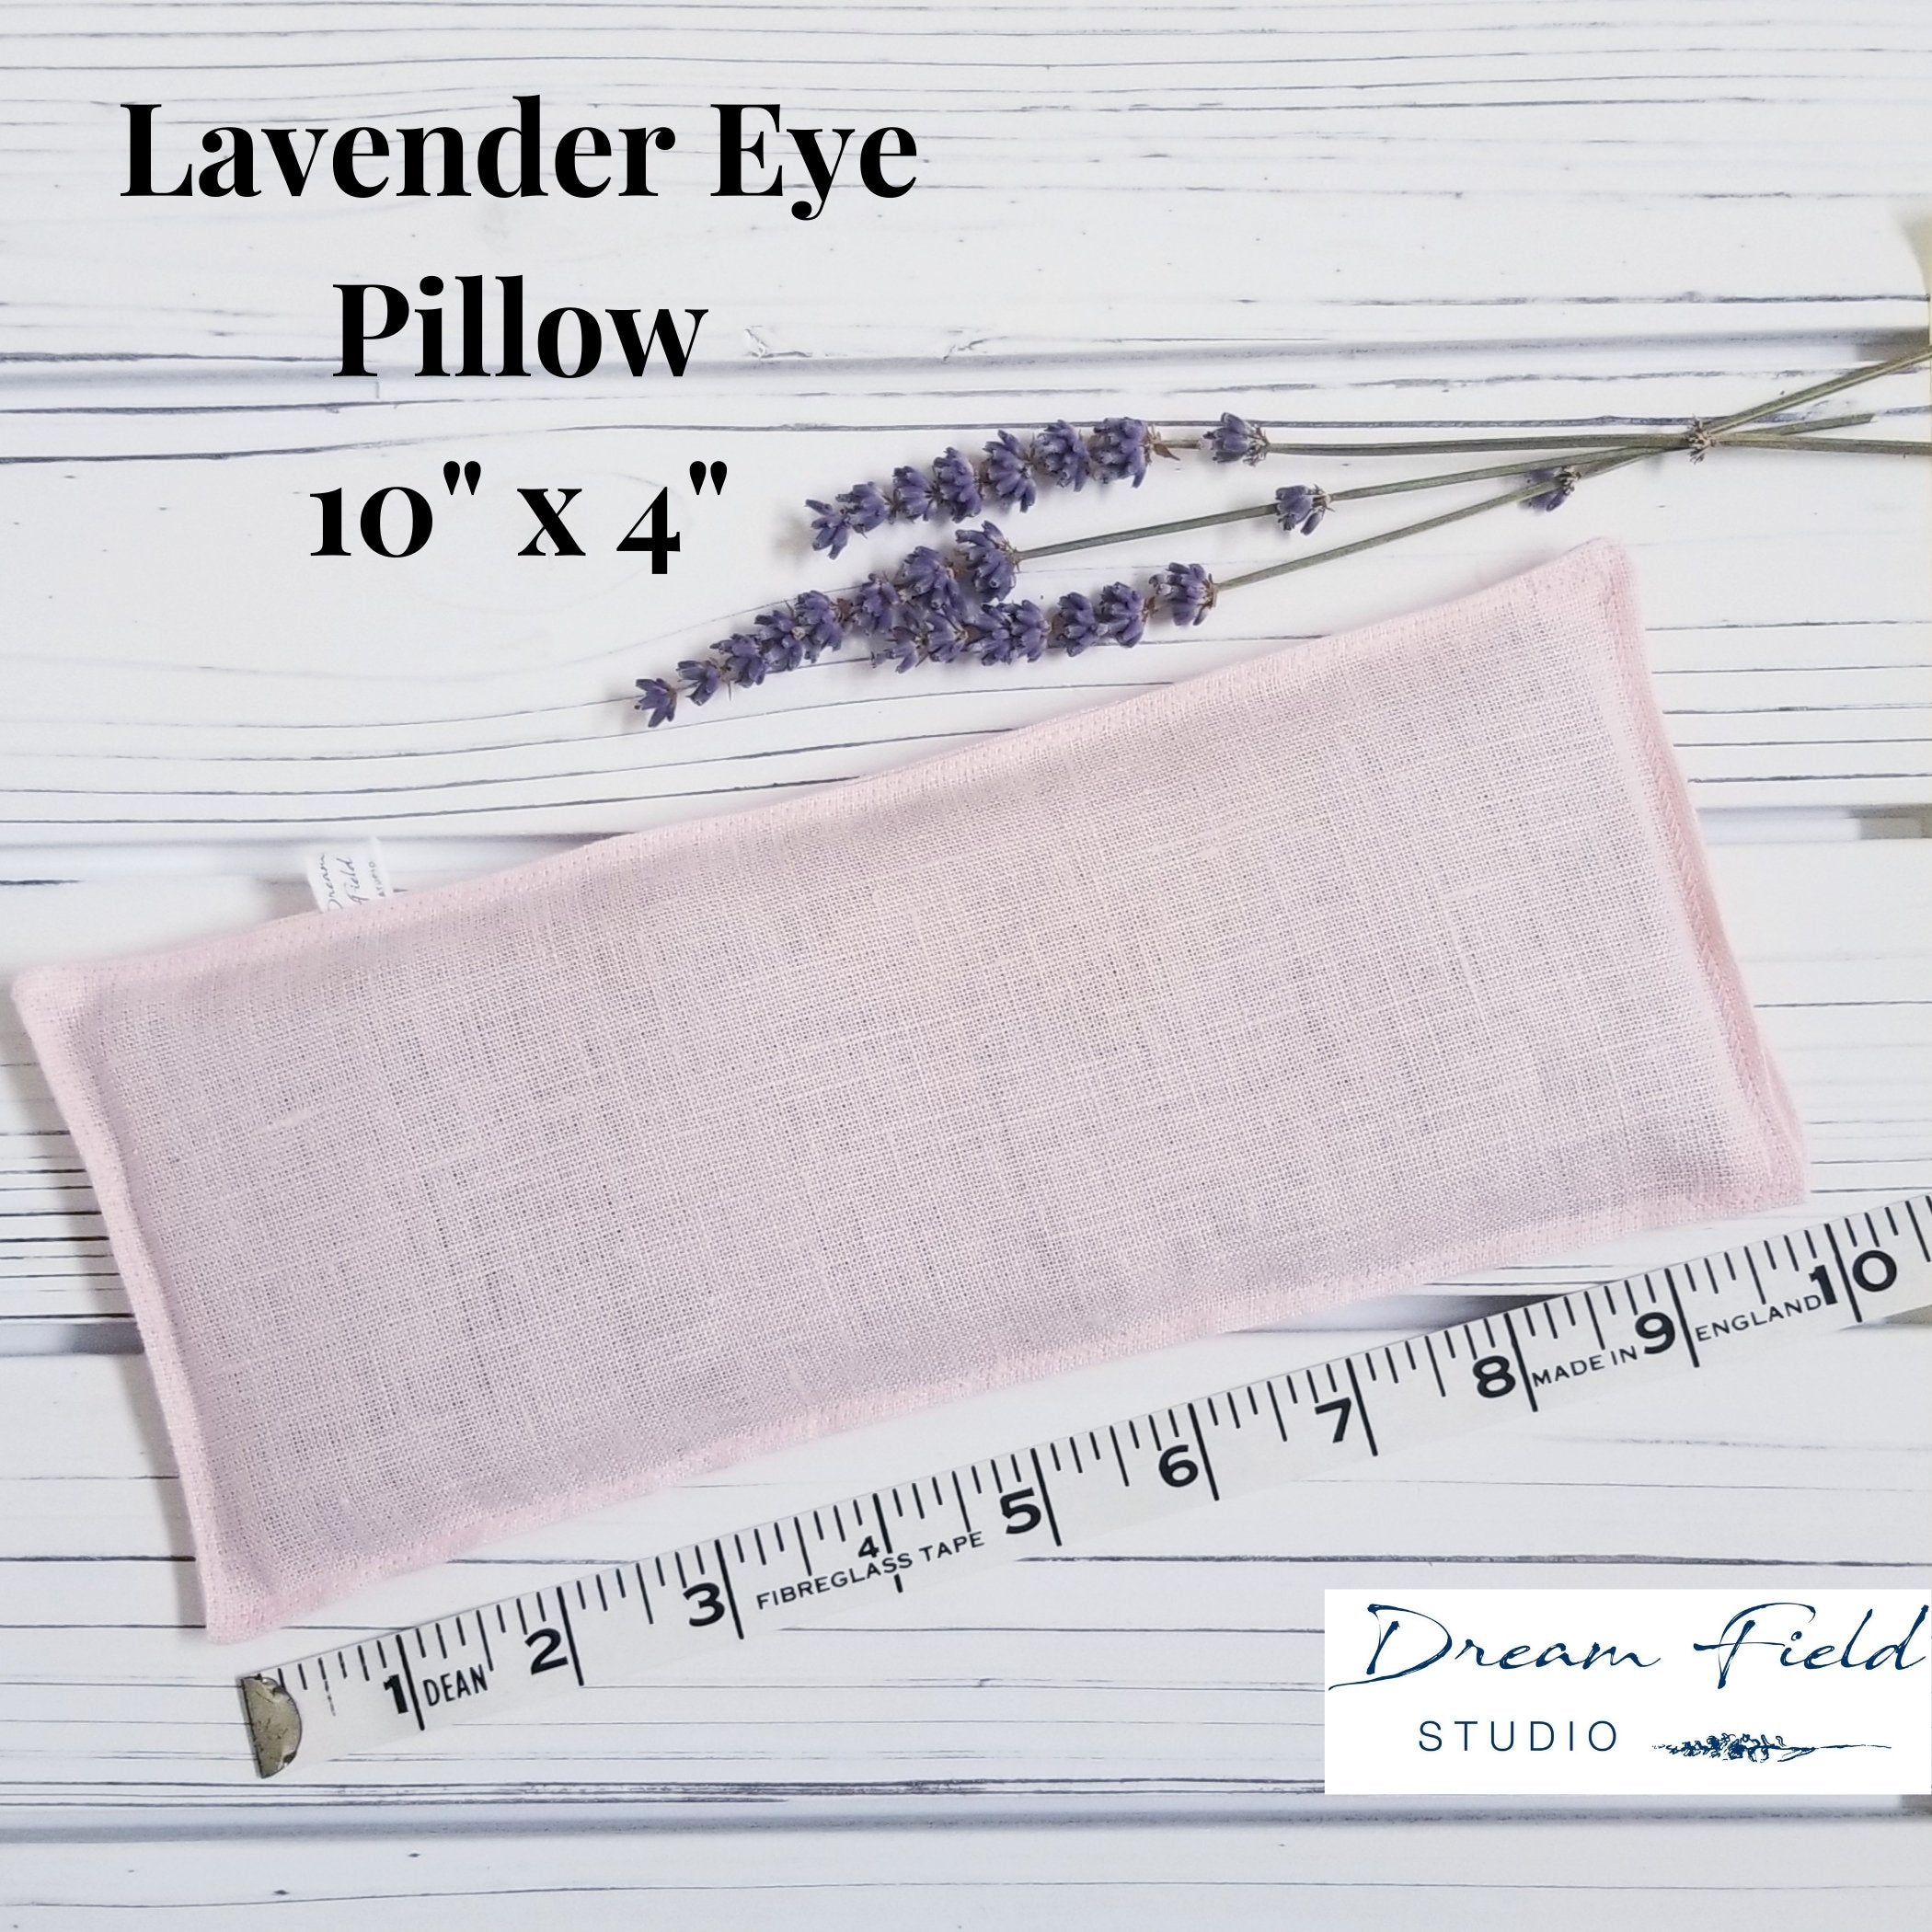 Size specifications of 10" x 4" lavender eye pillow by Dream Field Studio